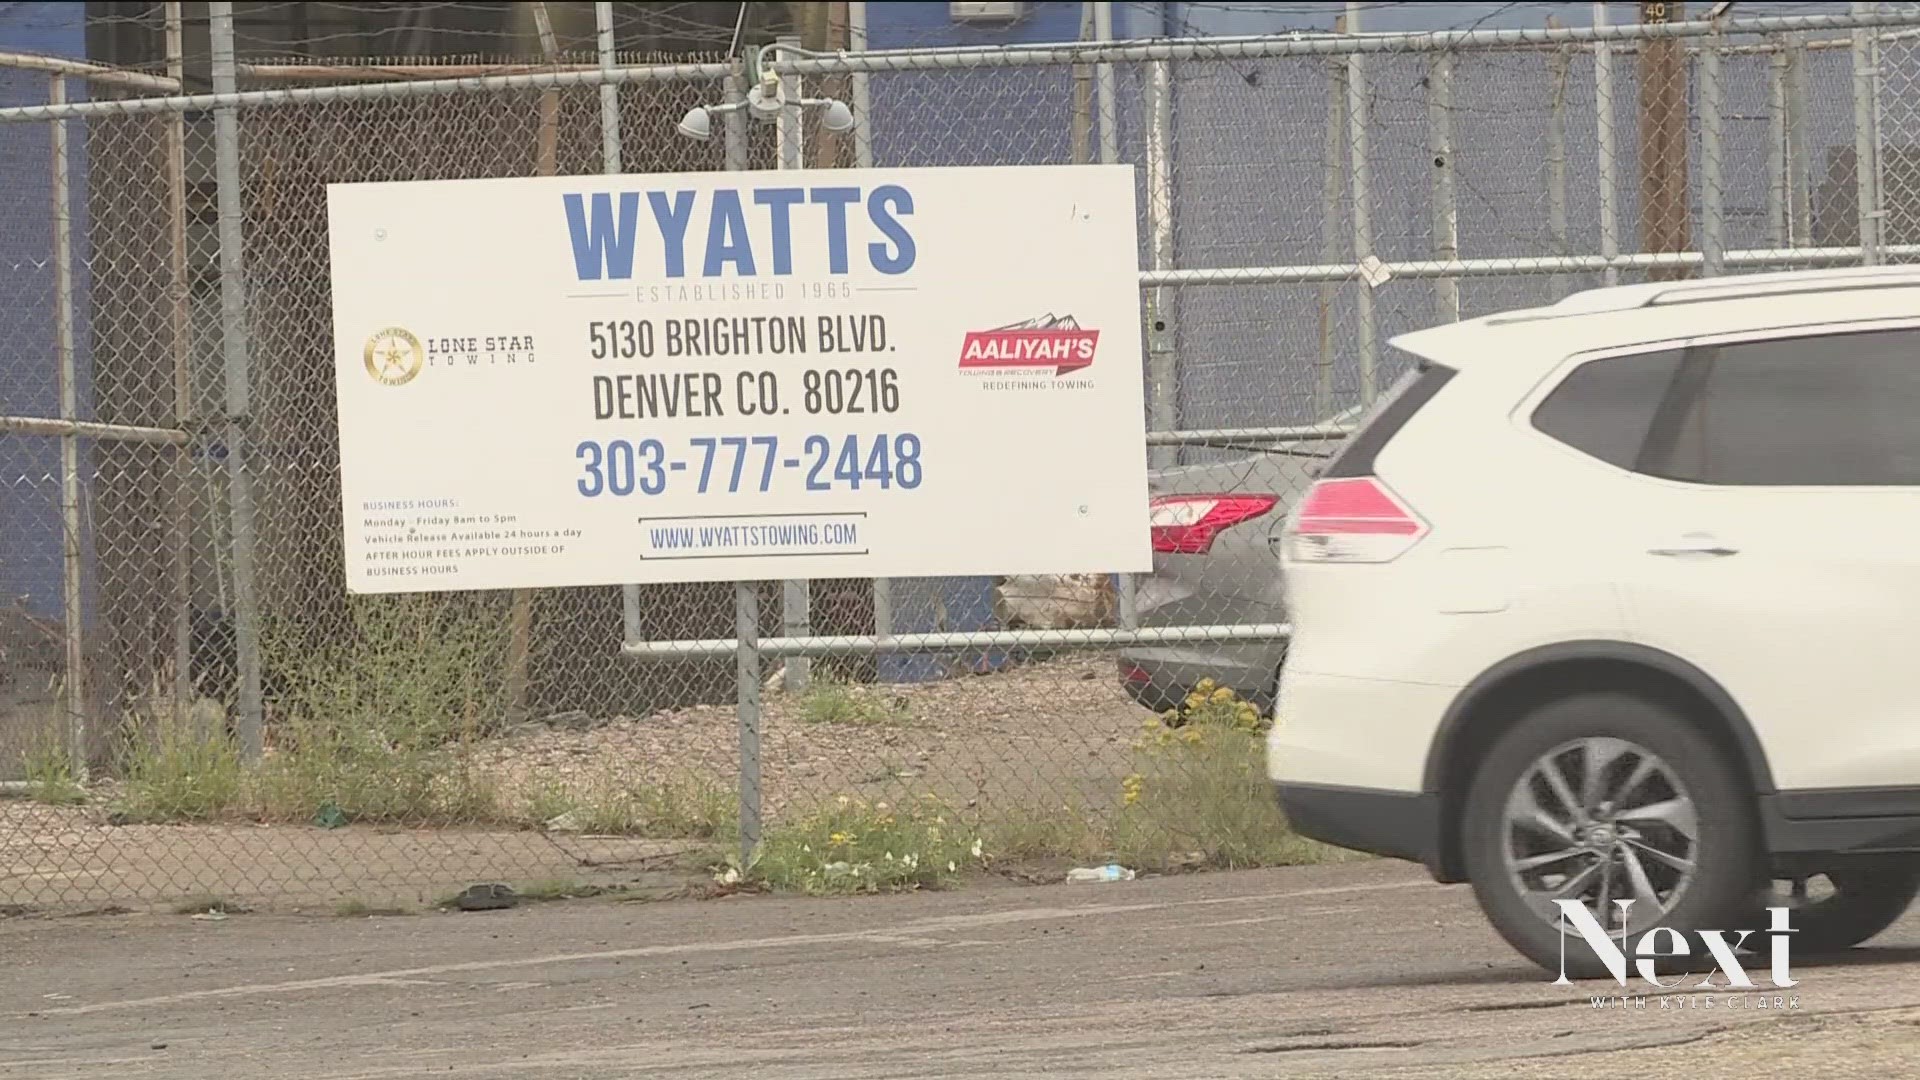 A PUC investigator found no violations by Wyatt's Towing in state senator's "unfortunate towing incident."